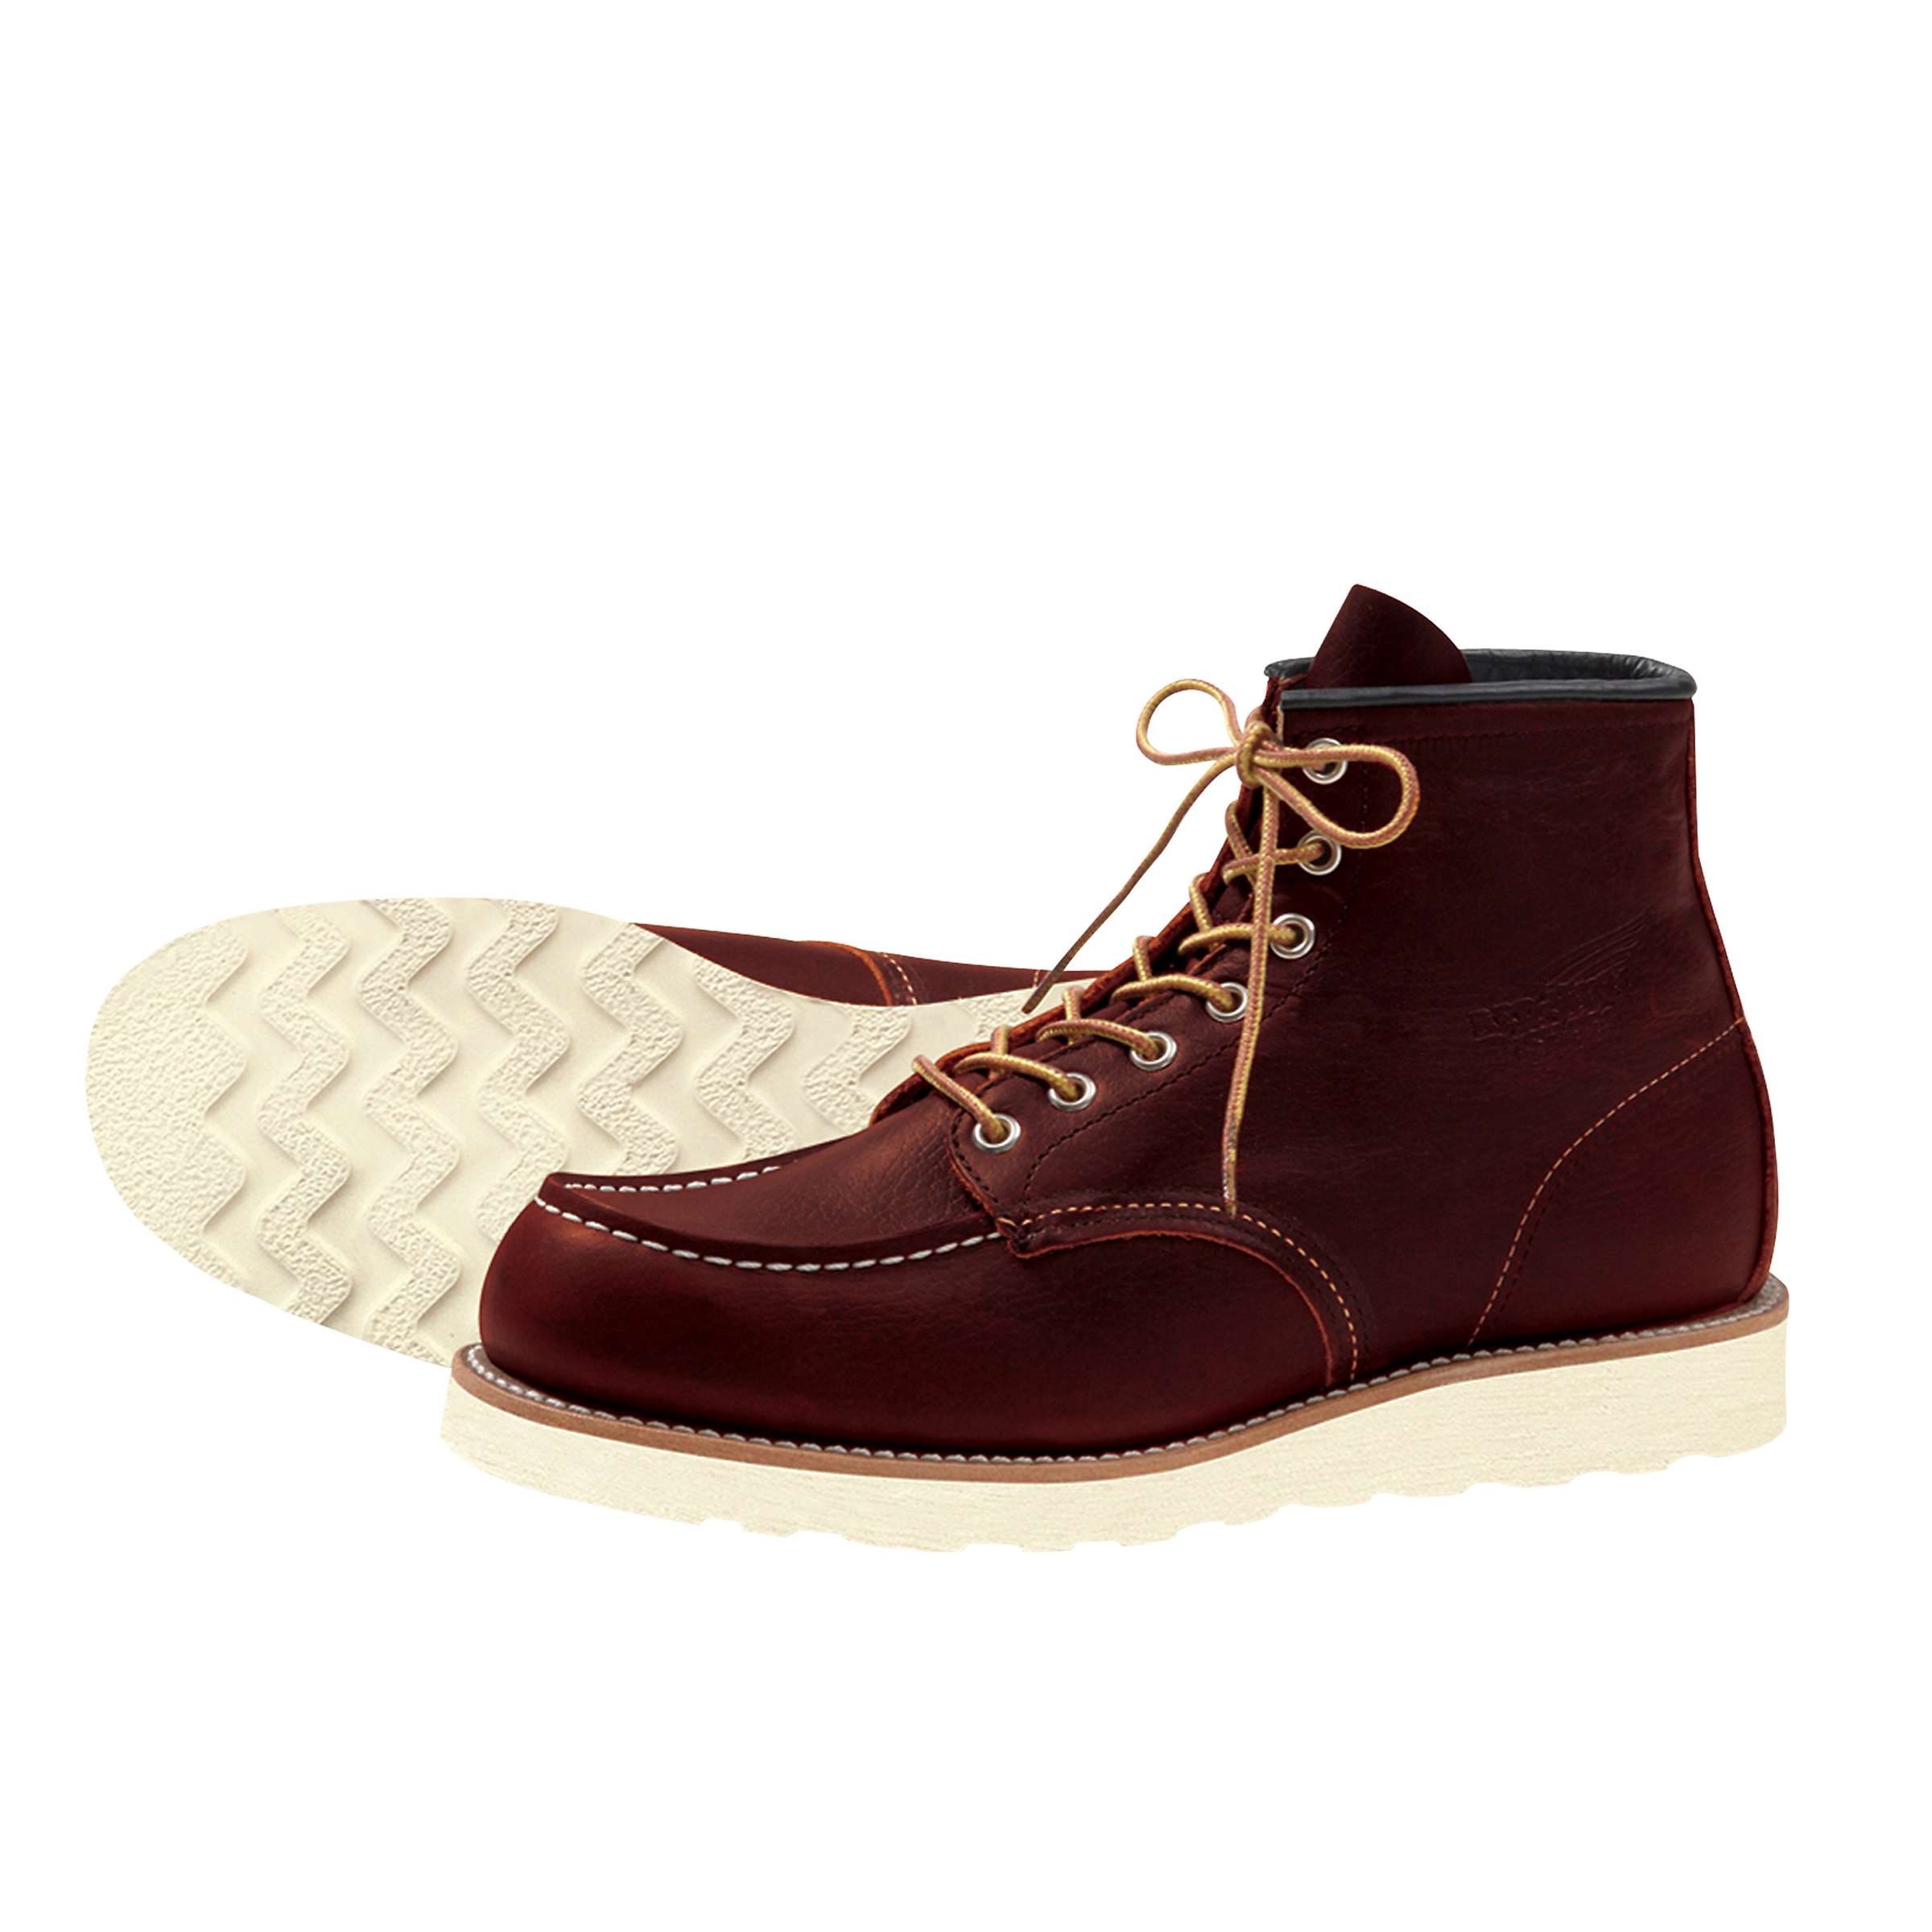 Red Wing Briar Leather Moc Toe Shoes for Men Mens Shoes Boots Chukka boots and desert boots 